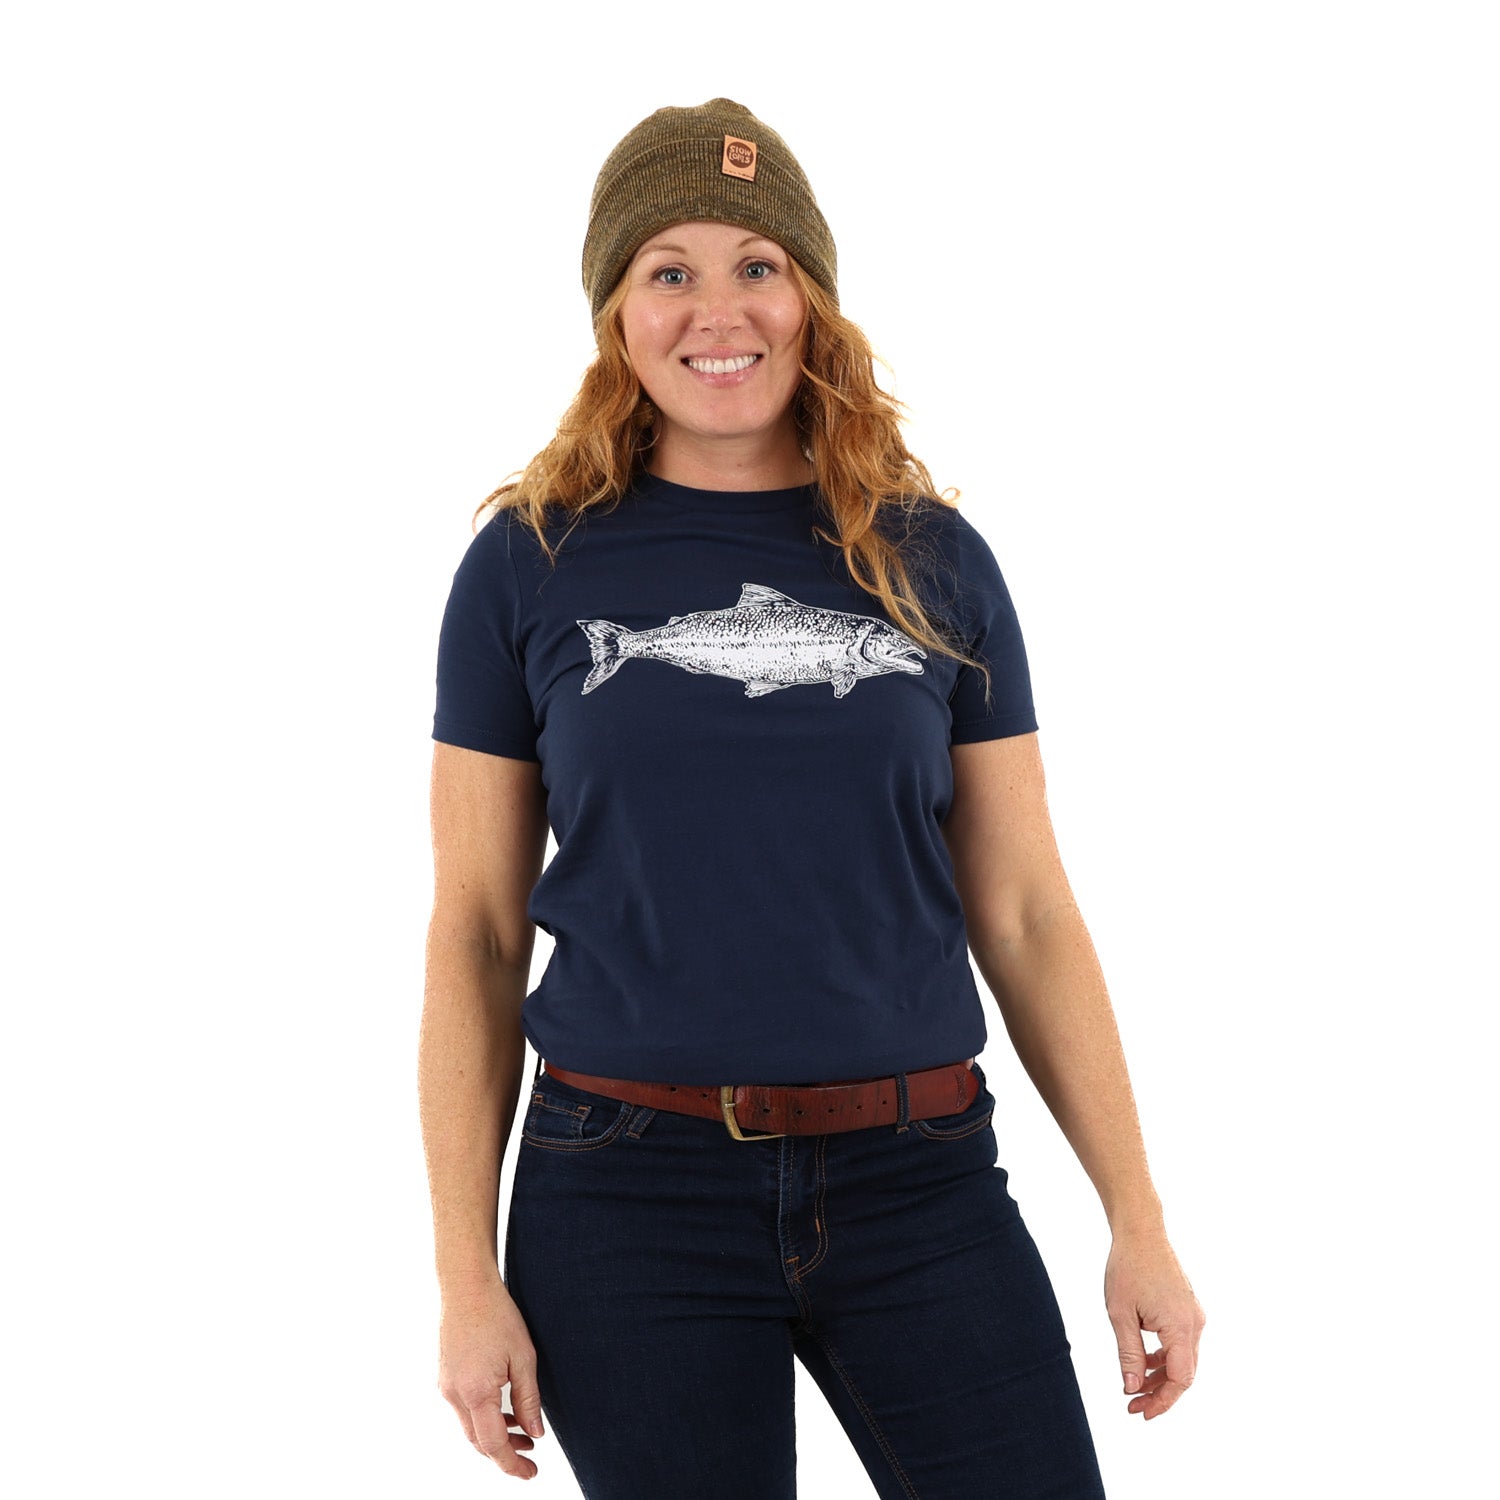 Woman wearing fitted navy blue t shirt with a salmon printed in white ink